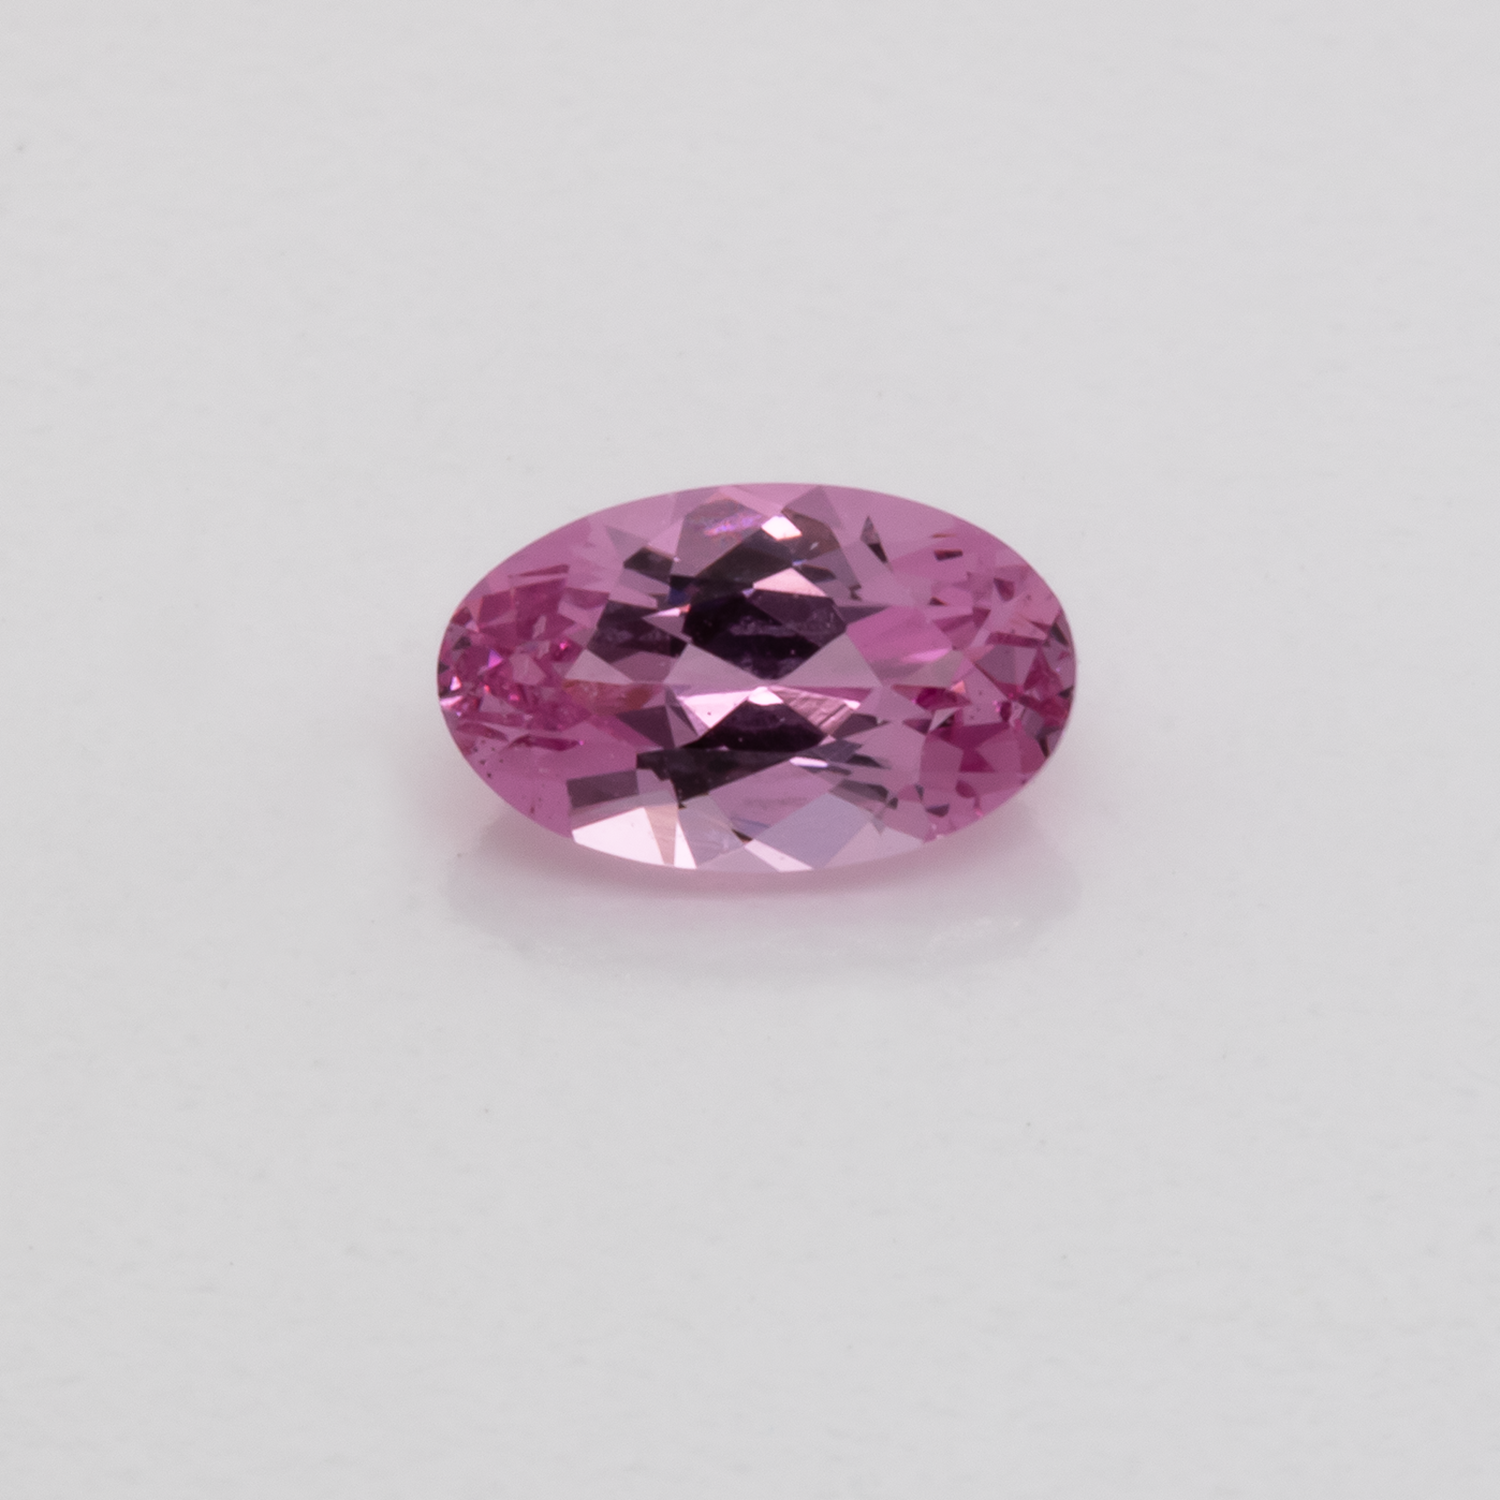 Spinell - rosa, oval, 5x3 mm, 0,26 cts, Nr. SP90025